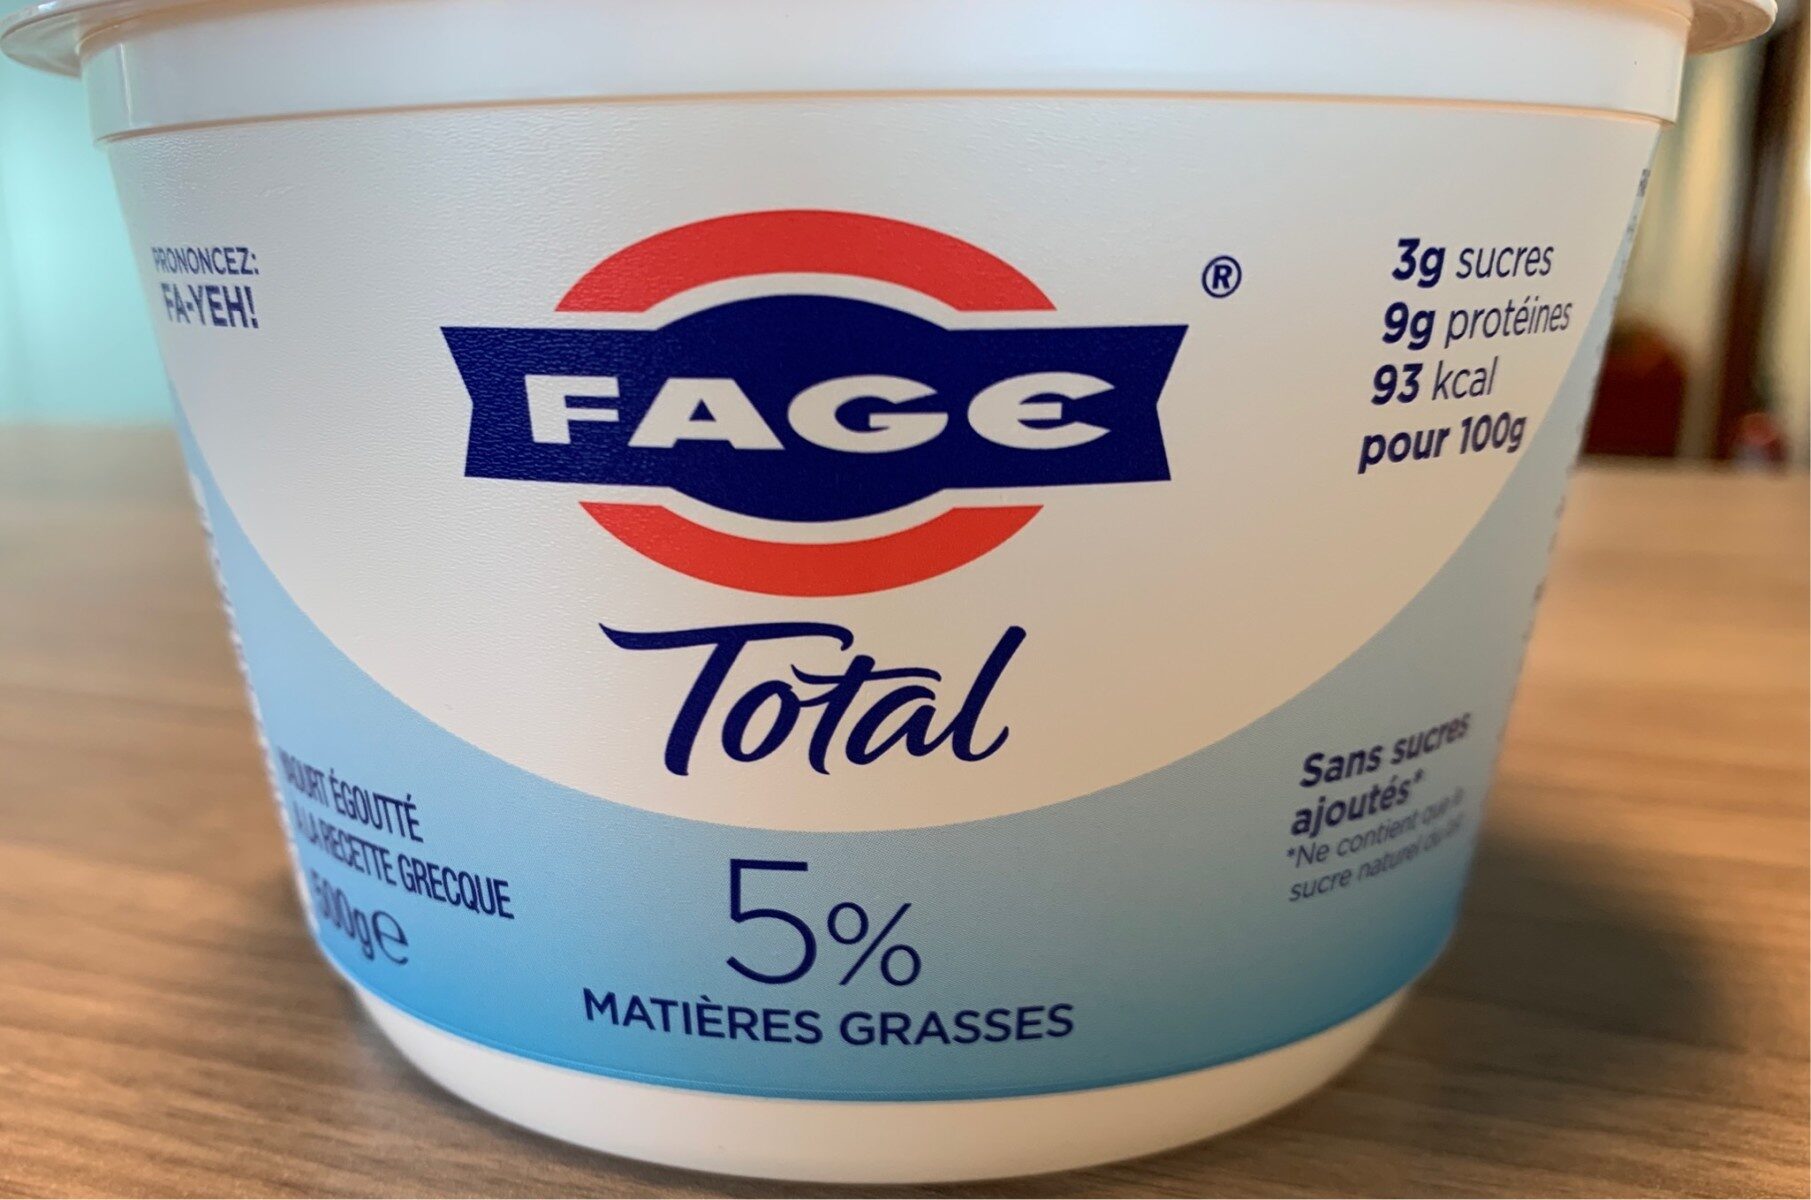 Yaourt Grecque Total 5% MG - Product - fr